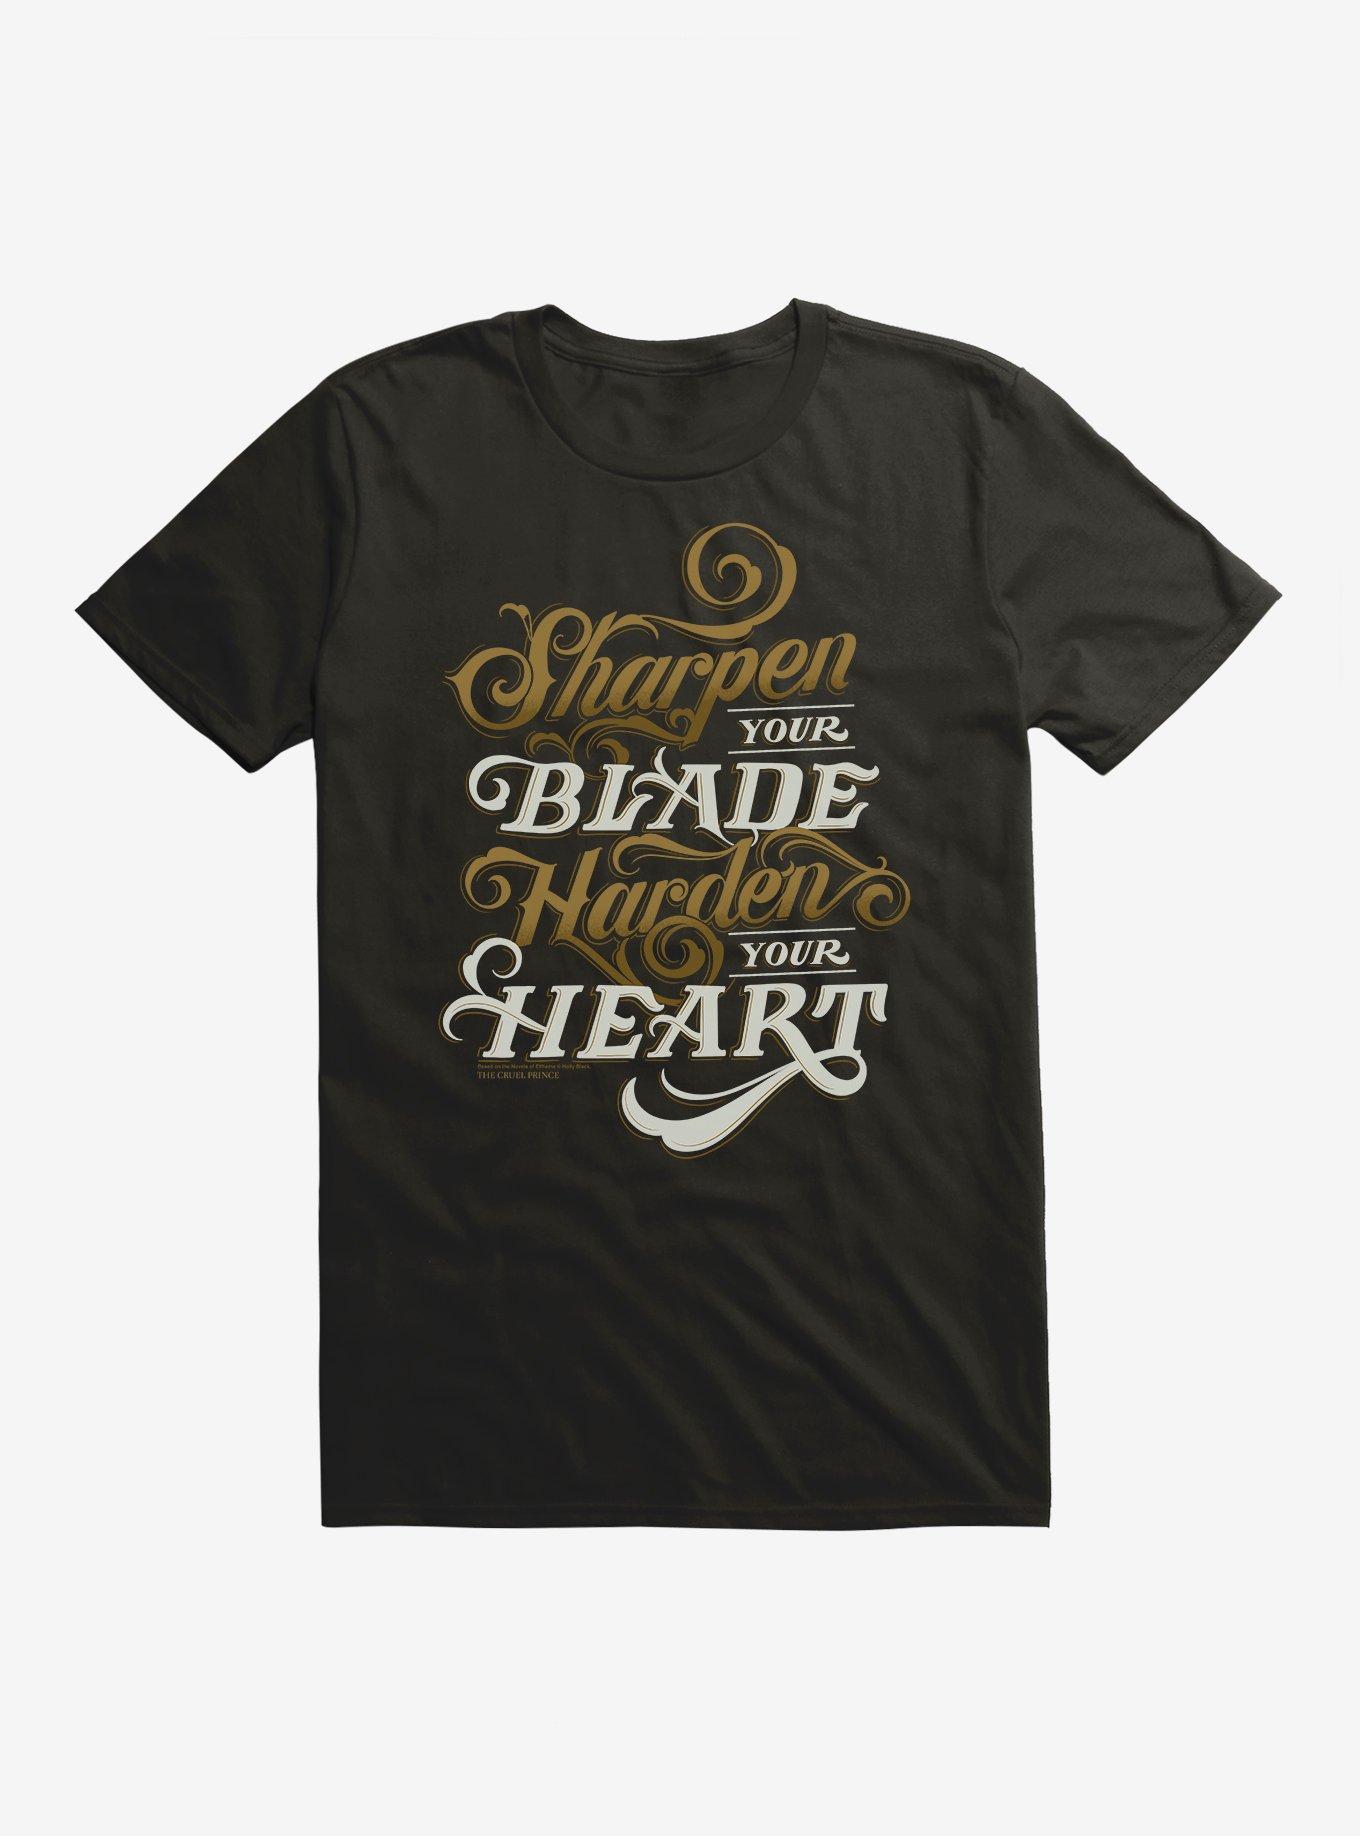 The Cruel Prince Sinister Enchantment Collection: Sharpen Your Blade T-Shirt